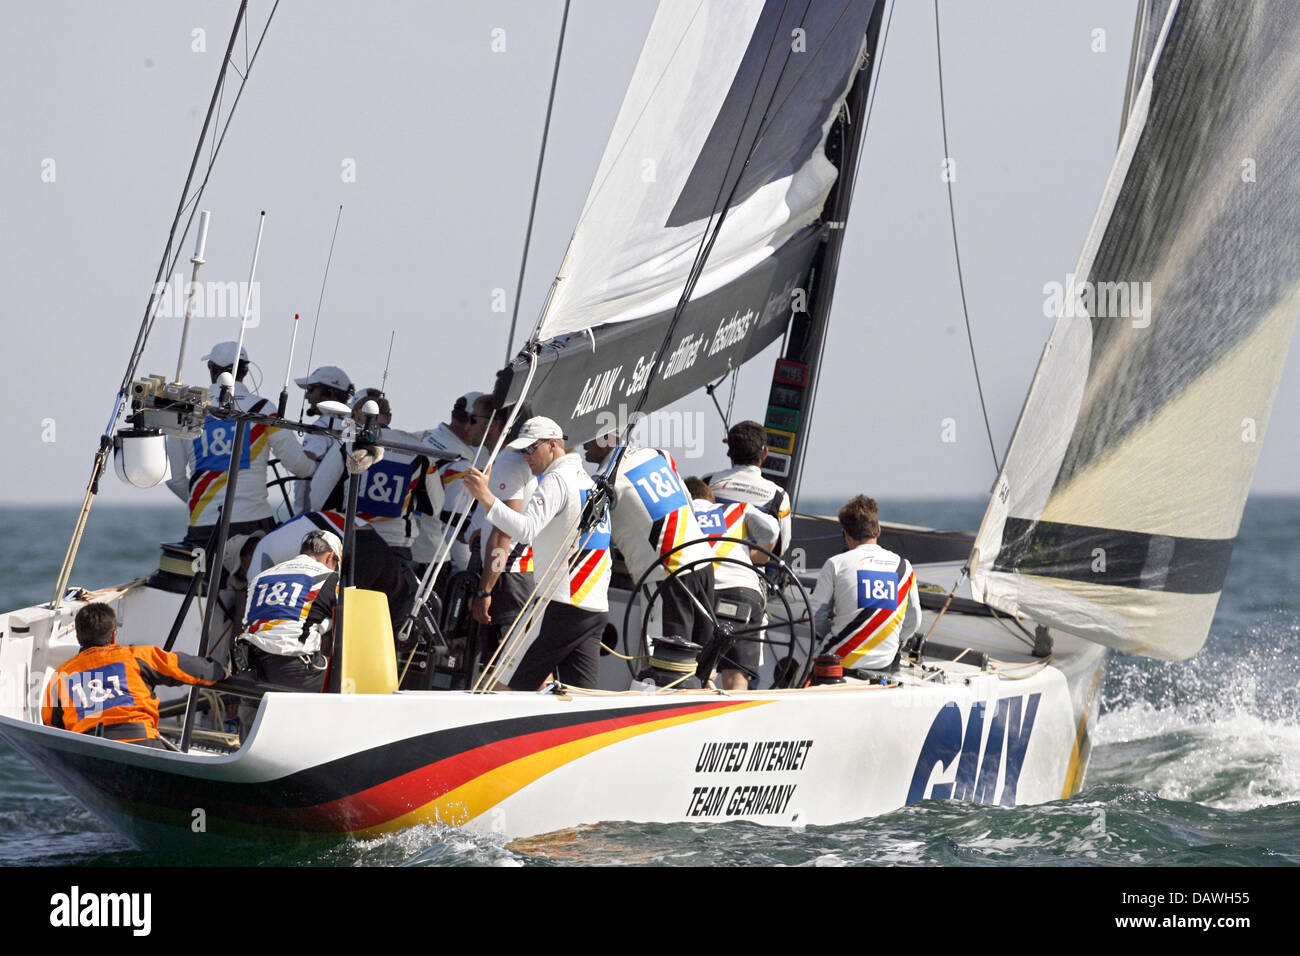 The yacht Germany 1 (GER 89) sails the fourth race of the Louis